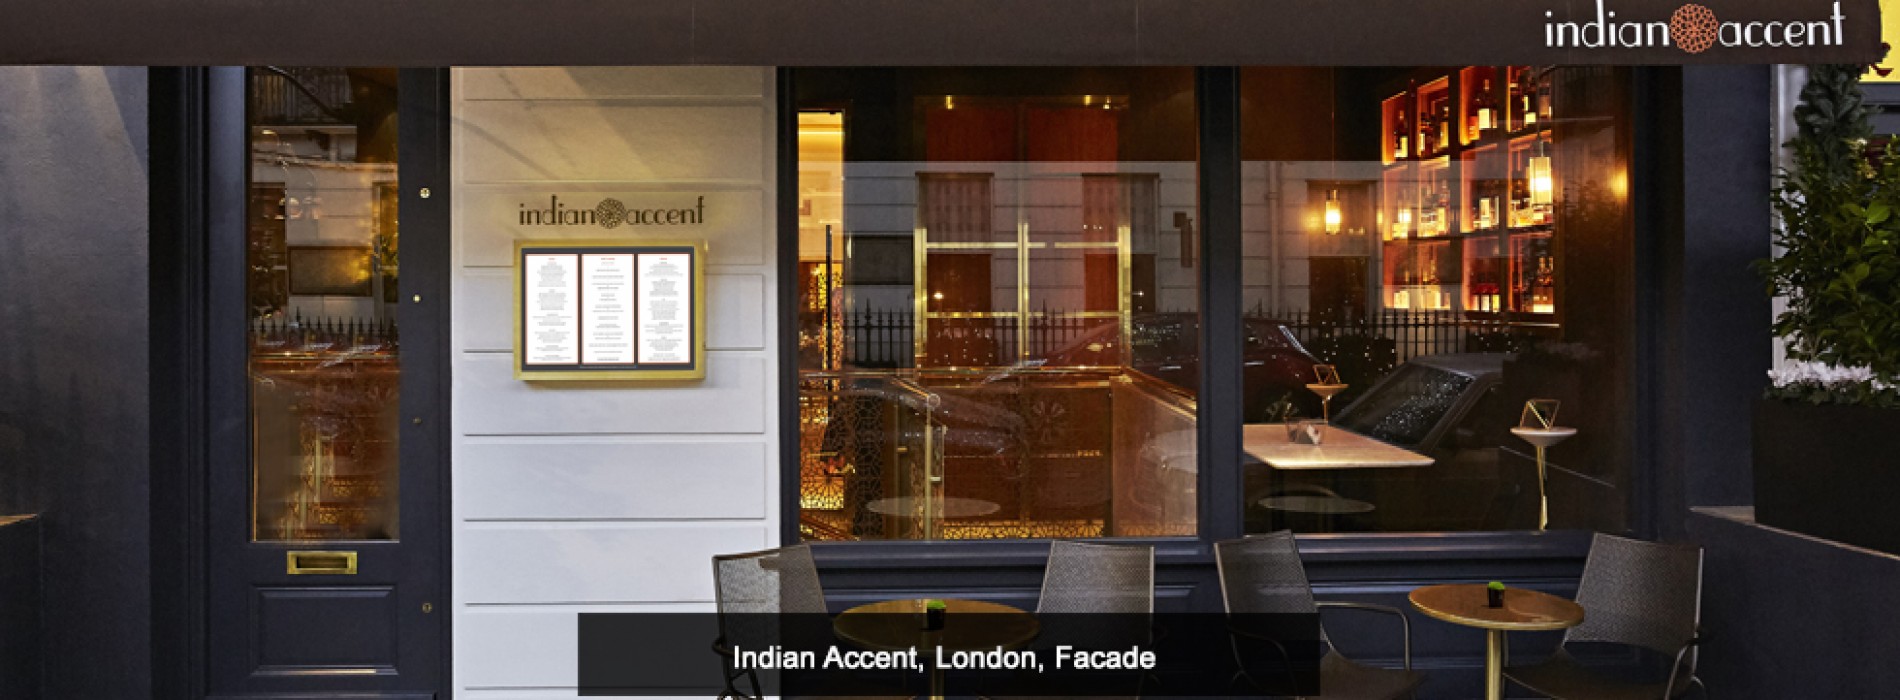 Indian Accent opens in London